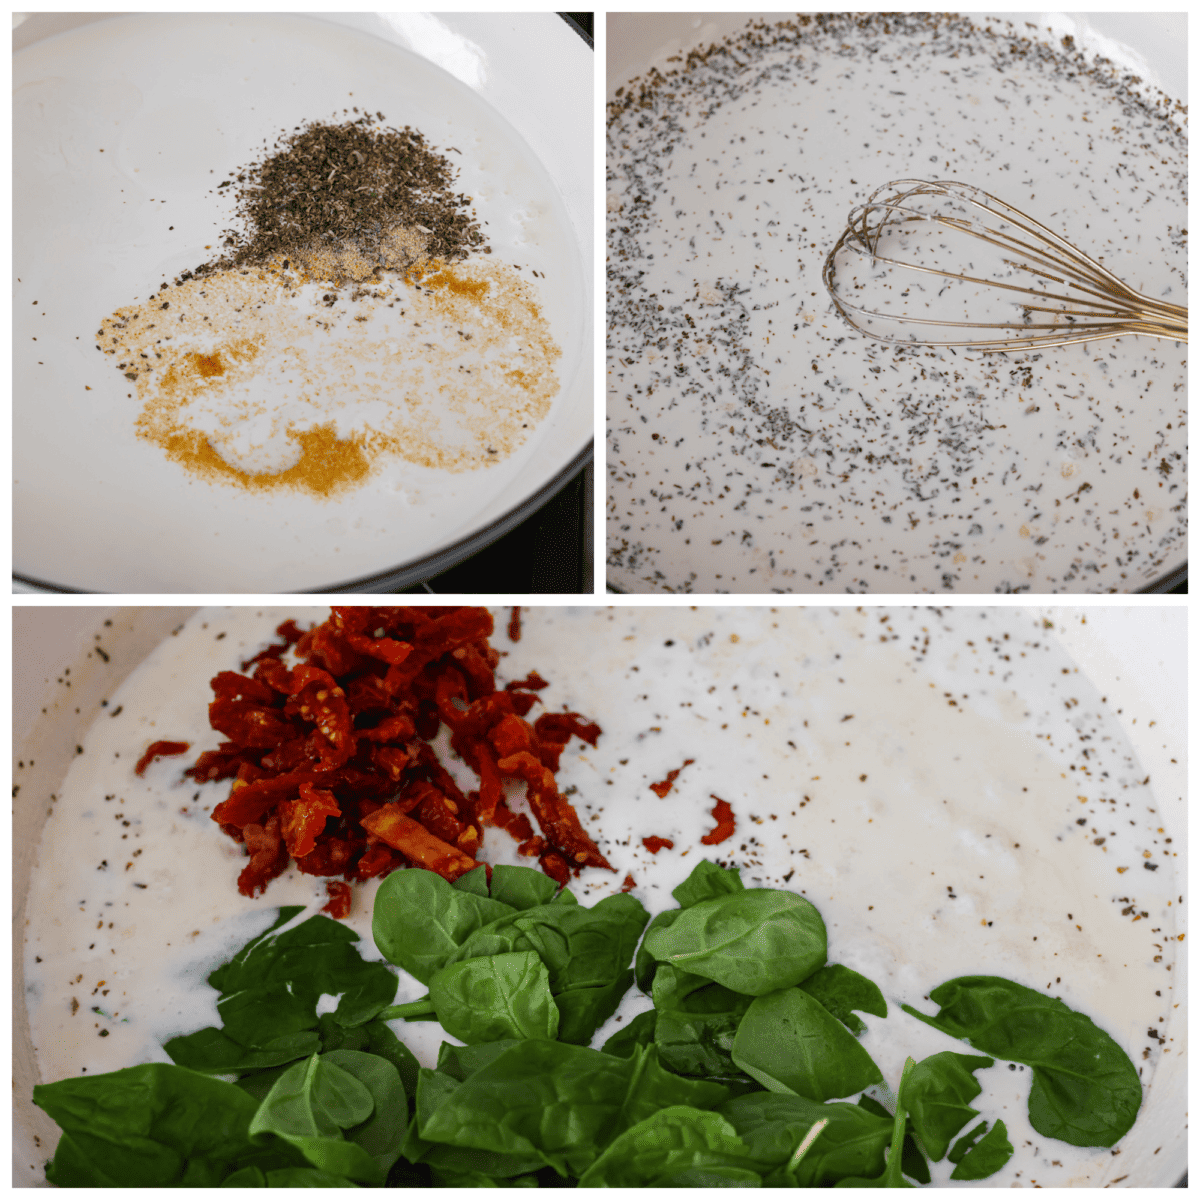 3-photo collage of sauce ingredients being mixed together.